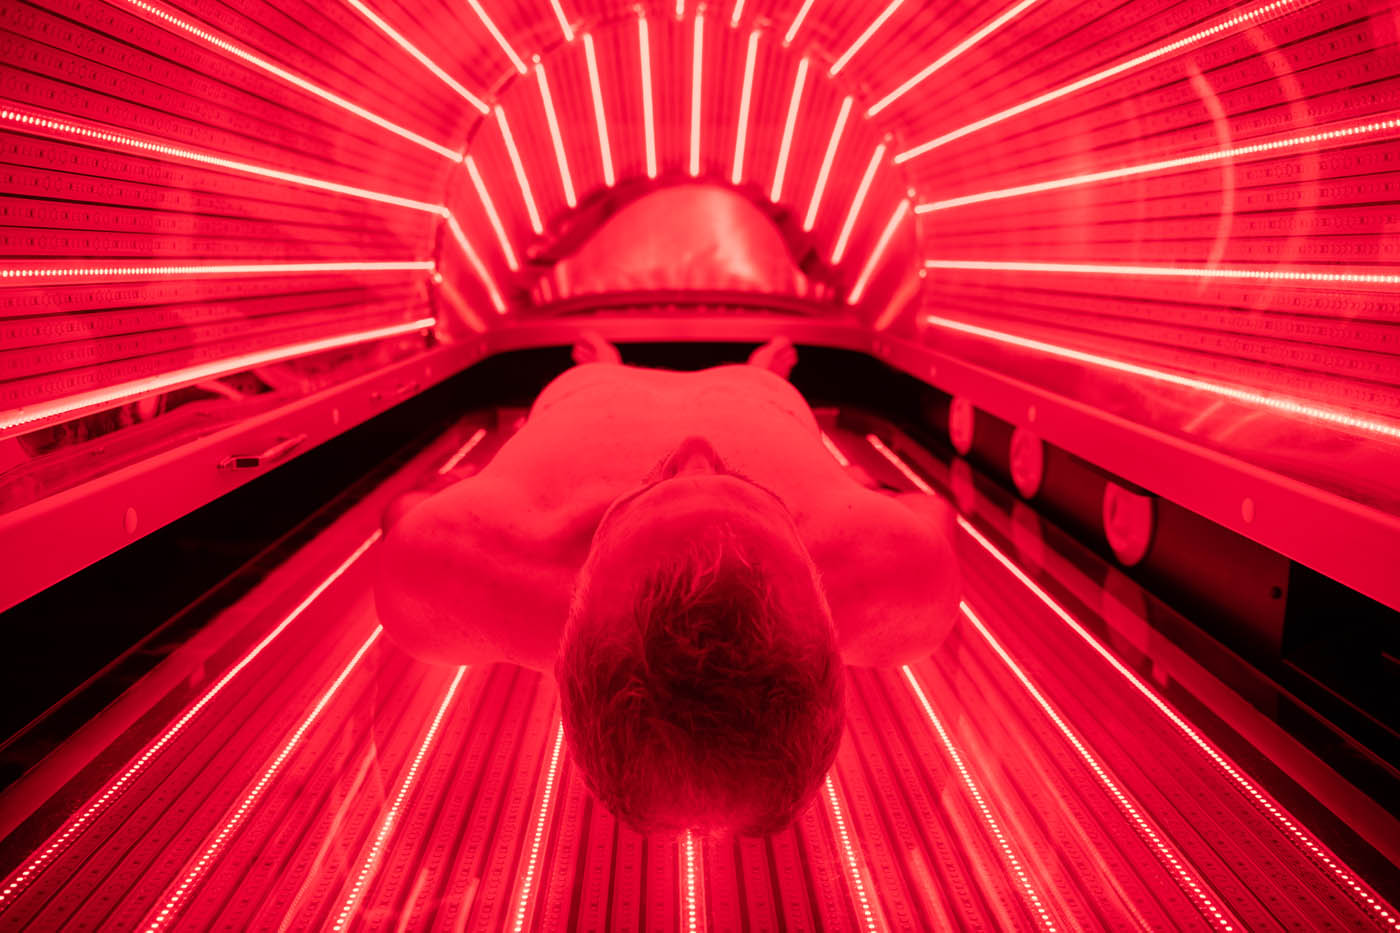 A man getting into a dark pod with bright red light, contact Light Lounge today for your infrared light therapy in Denver.